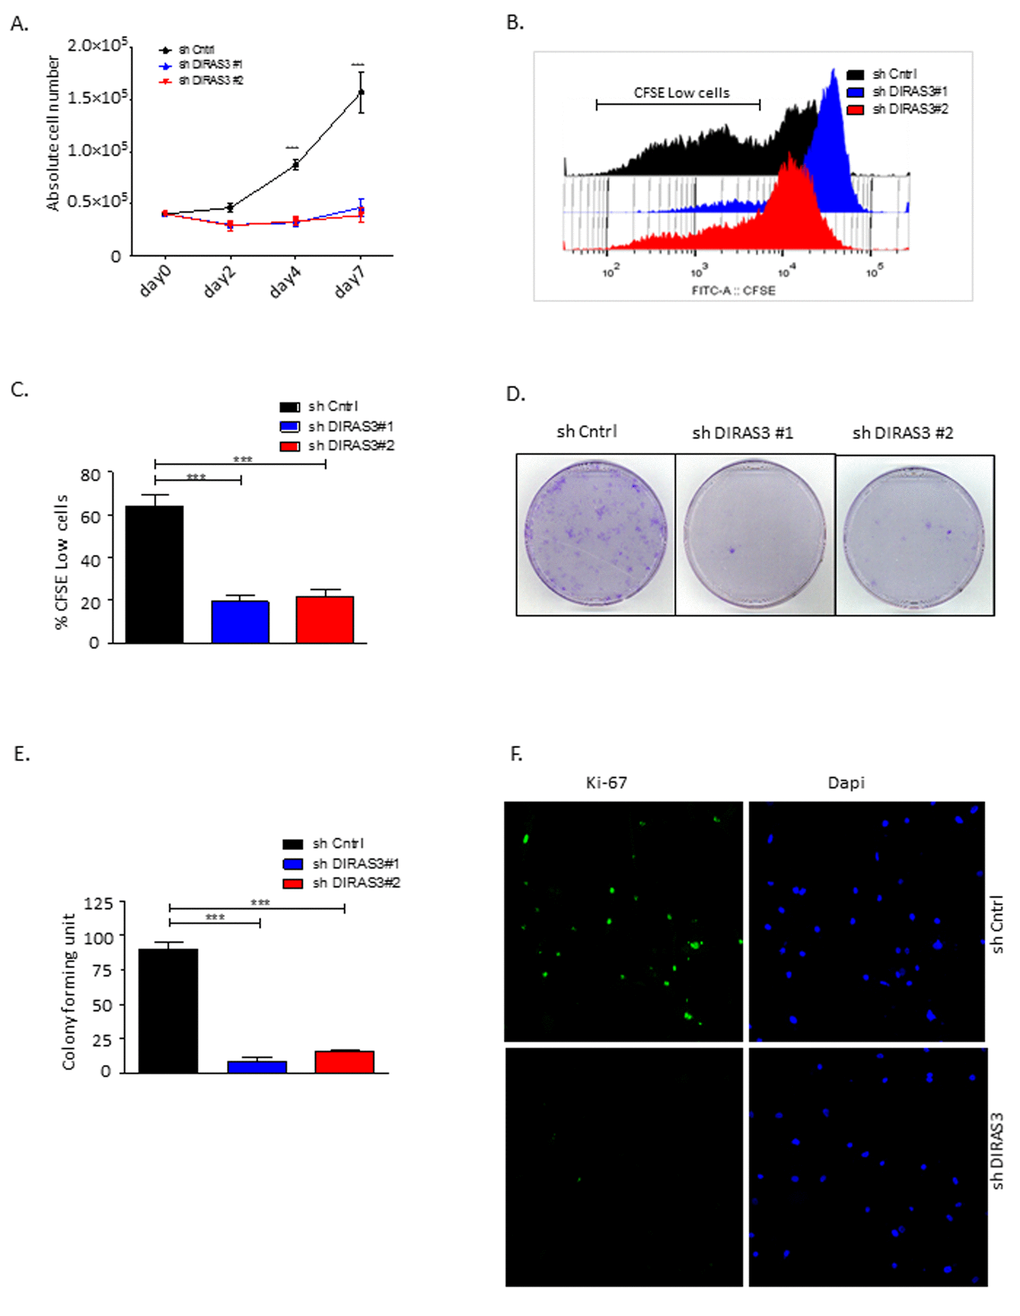 Silencing of DIRAS3 reduces proliferation and self-renewal of human ASCs. (A) Proliferation of ASCs following knock-down (KD) of DIRAS3 was monitored by cell counting (n=4). (B and C) Monitoring of cell proliferation by CFSE signal dilution technique. Flow cytometric analyses demonstrated a higher proliferation rate of shCntrl relative to shDIRAS3 infected ASCs, reflected by a significantly higher percentage of CFSE low cells compared to shDIRAS3 infected ASCs. Differentially transduced ASCs were stained with CFSE and cultured for 4 days. Dilution of CFSE signal was monitored by FACS (B). Percentage of CFSE low cells was plotted (C) (n=4). (D and E) ASCs were seeded at a density of 500 cells in tissue culture dish following transduction with shDIRAS3 and shCntrl expressing lentiviruses and selection. Number of colonies were counted 10 days post seeding after staining with crystal violet (D) and plotted (E) (n=3) (F) Expression of Ki-67 was assessed in transduced ASCs via confocal microscopy. Cells were fixed on cover slips and stained for Ki-67 (green) and DAPI (blue) for nuclear staining (n=3). All error bars represents the means ± SEM. p values *** = p